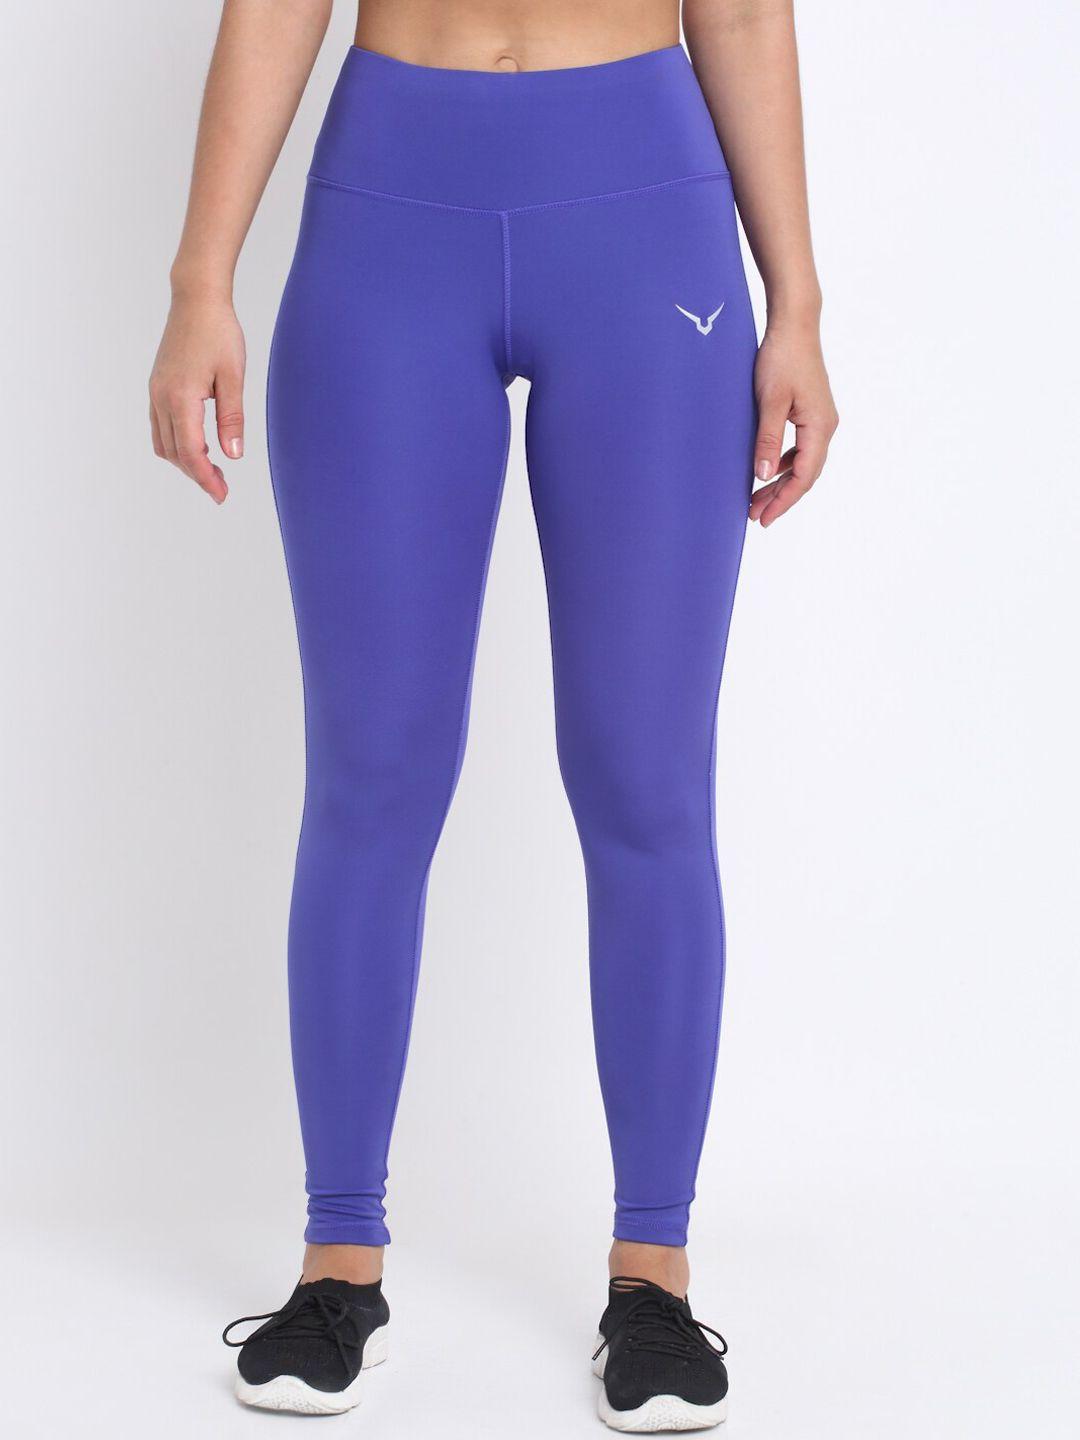 invincible women training or gym sports tights